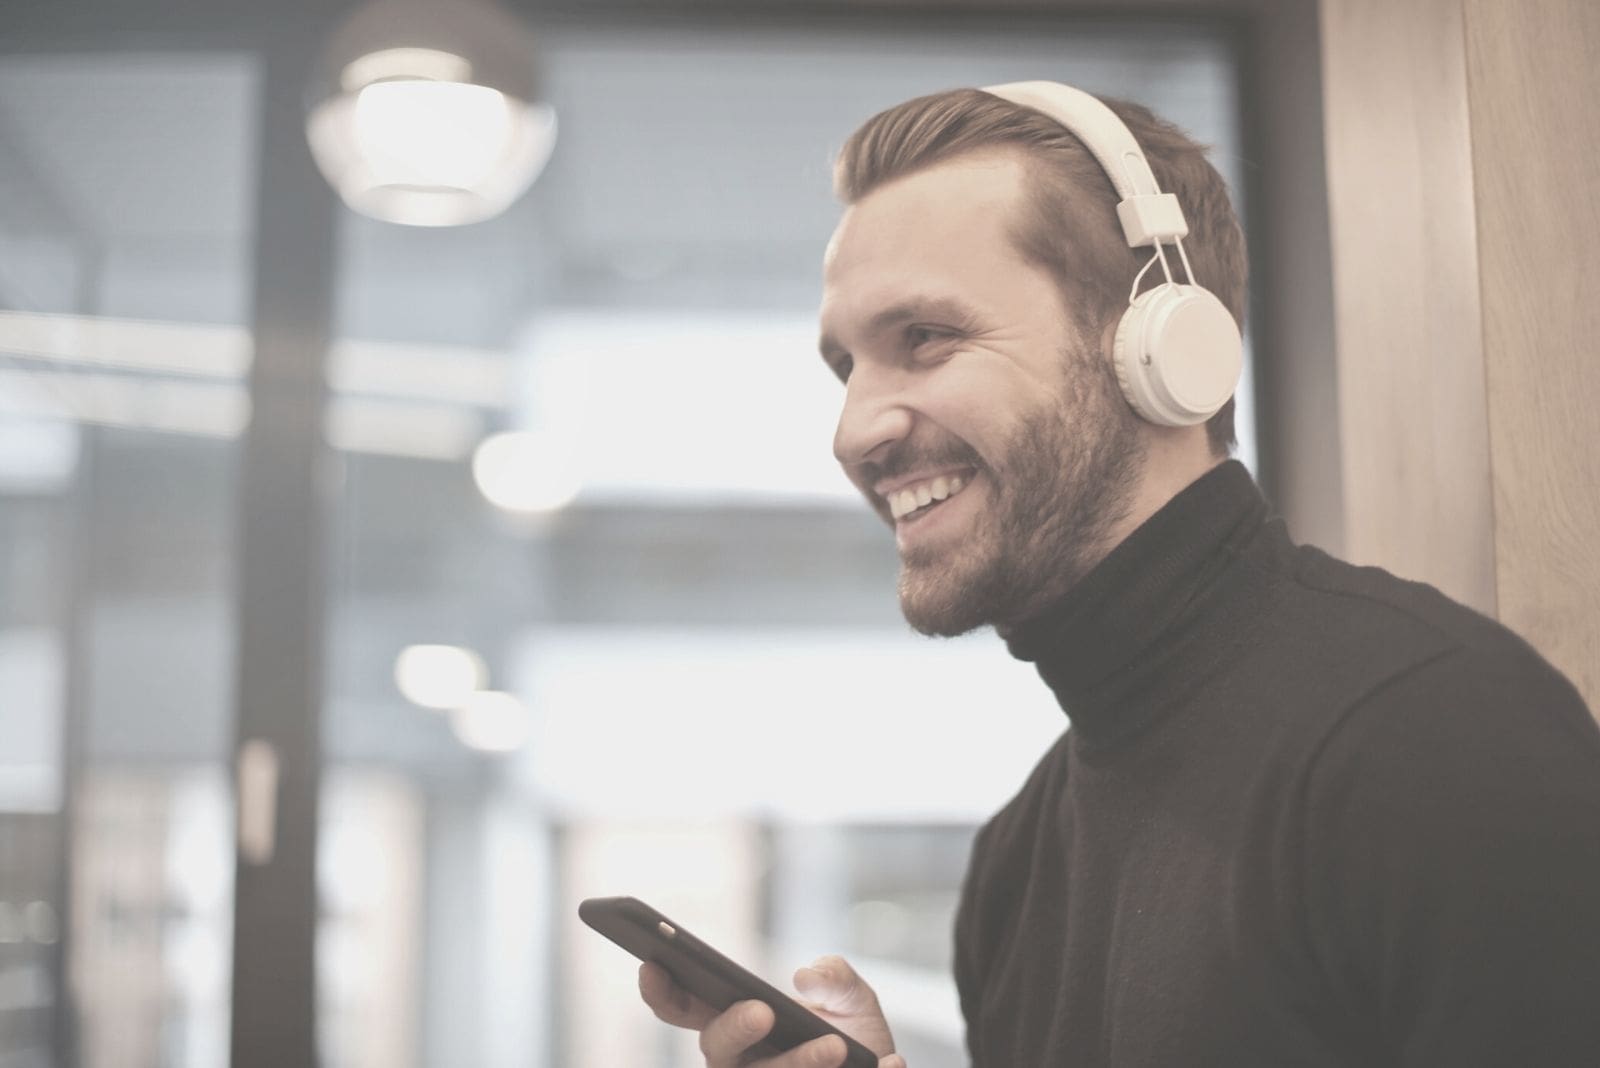 man with a headphone smiling and holding a phone indoors